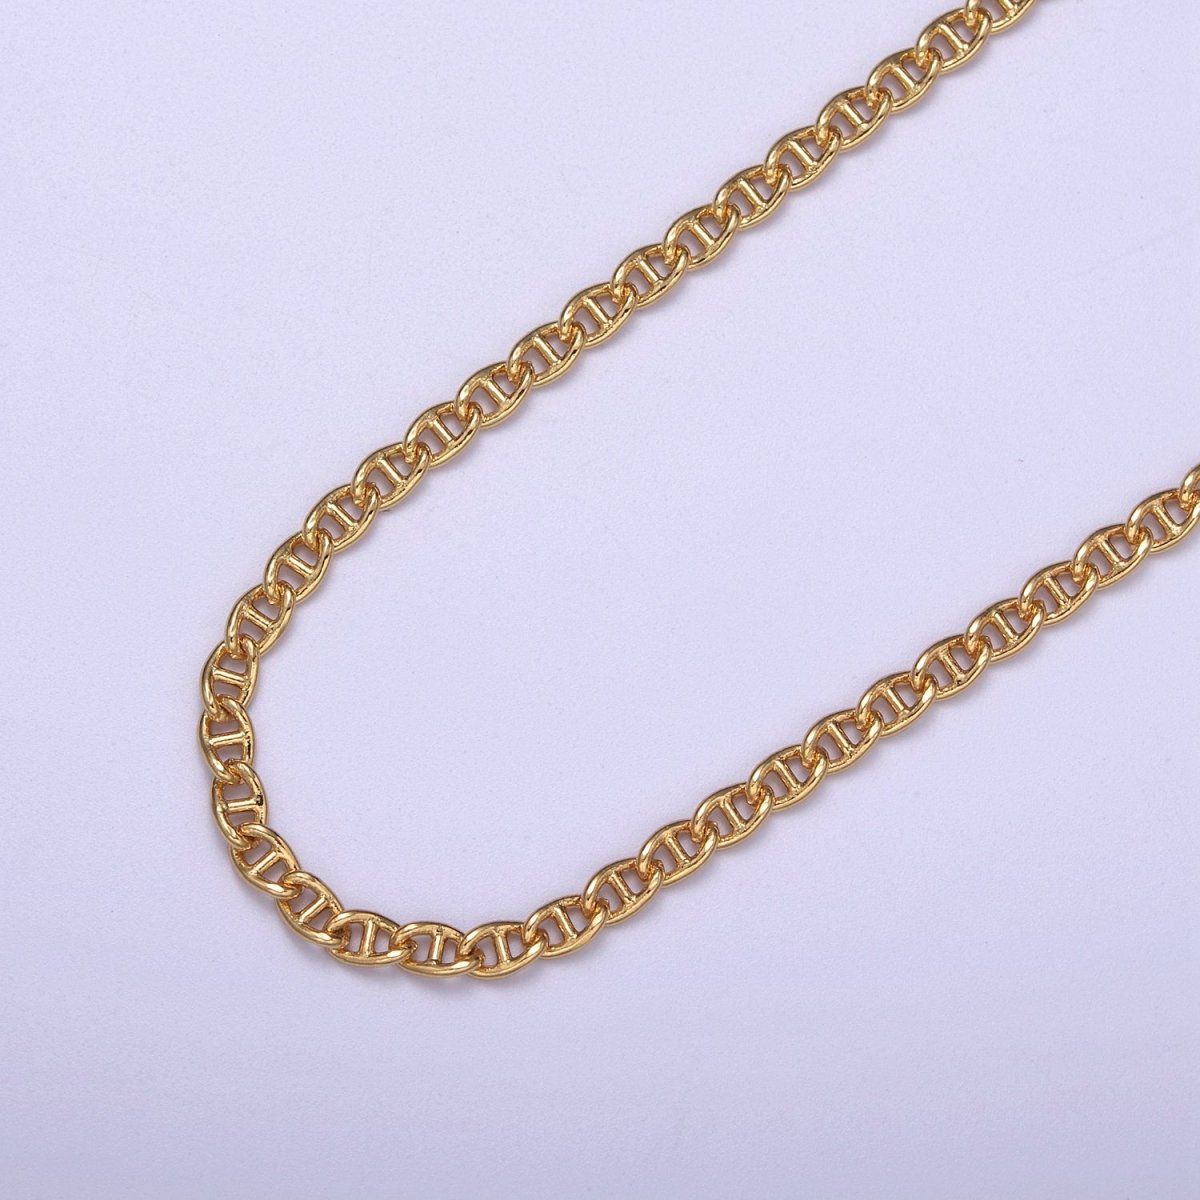 24K Gold Filled Anchor Chain, 5.2X3.2mm Wholesale Chain For Jewelry Making Component Supply | ROLL-625 Clearance Pricing - DLUXCA